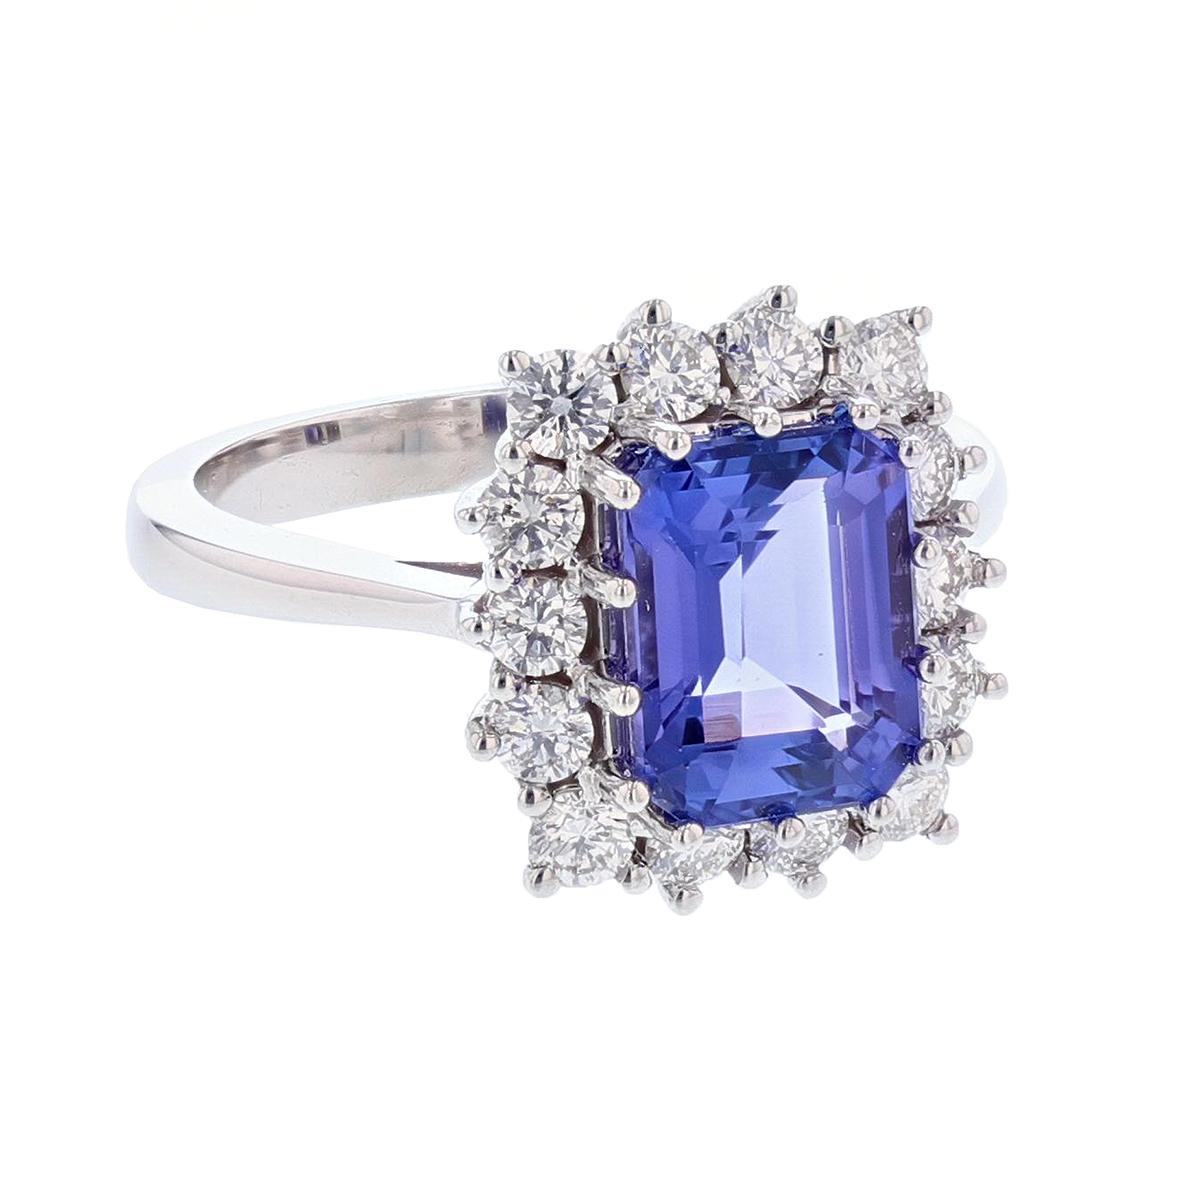 This ring is made in 14 karat white gold. The center stone is an Emerald cut Tanzanite weighing 2.88 carats and is prong set. The mounting features 14 round cut, prong set diamonds weighing 0.76 carats.